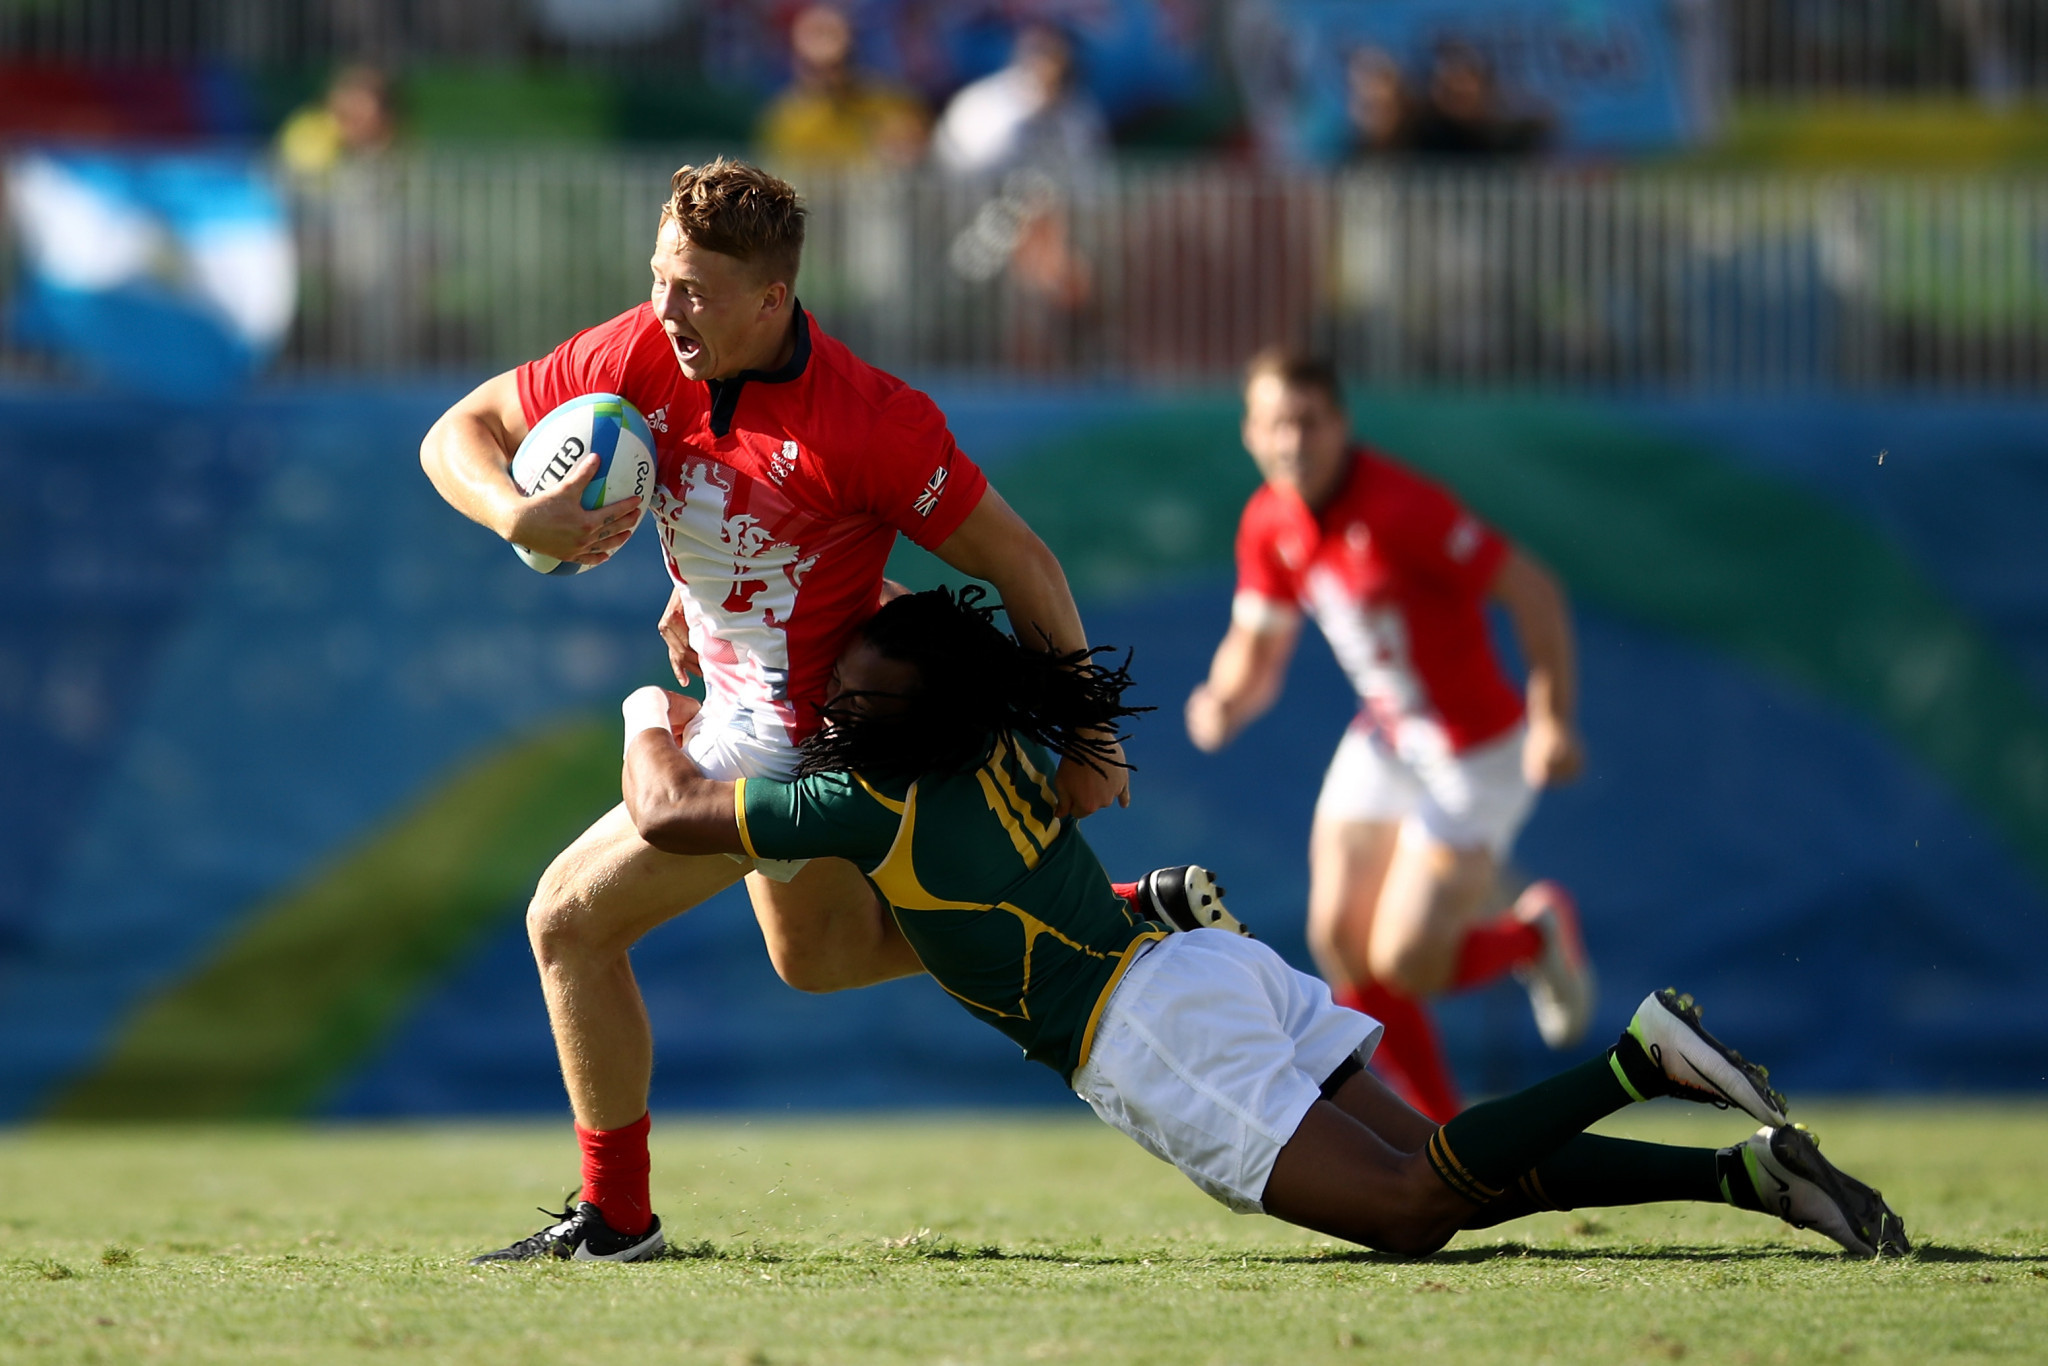 James Davies was one of two Welsh players in the British men's rugby sevens team at Rio 2016 ©Getty Images